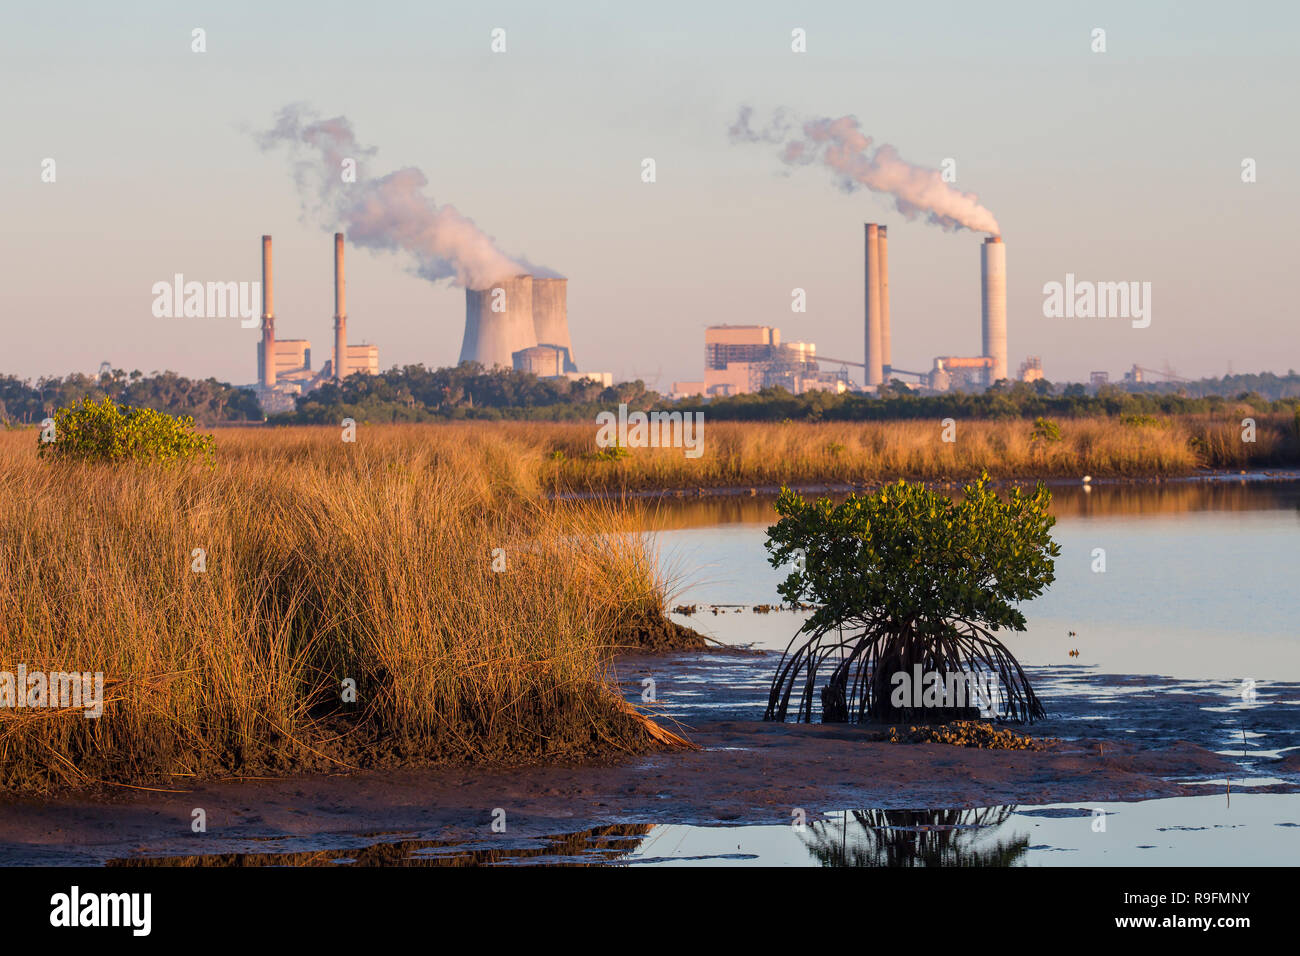 A view across the salt marsh wetlands of the Duke Energy Crystal River Complex on a 4,700 acre site near the mouth of the Crystal River in Florida Stock Photo